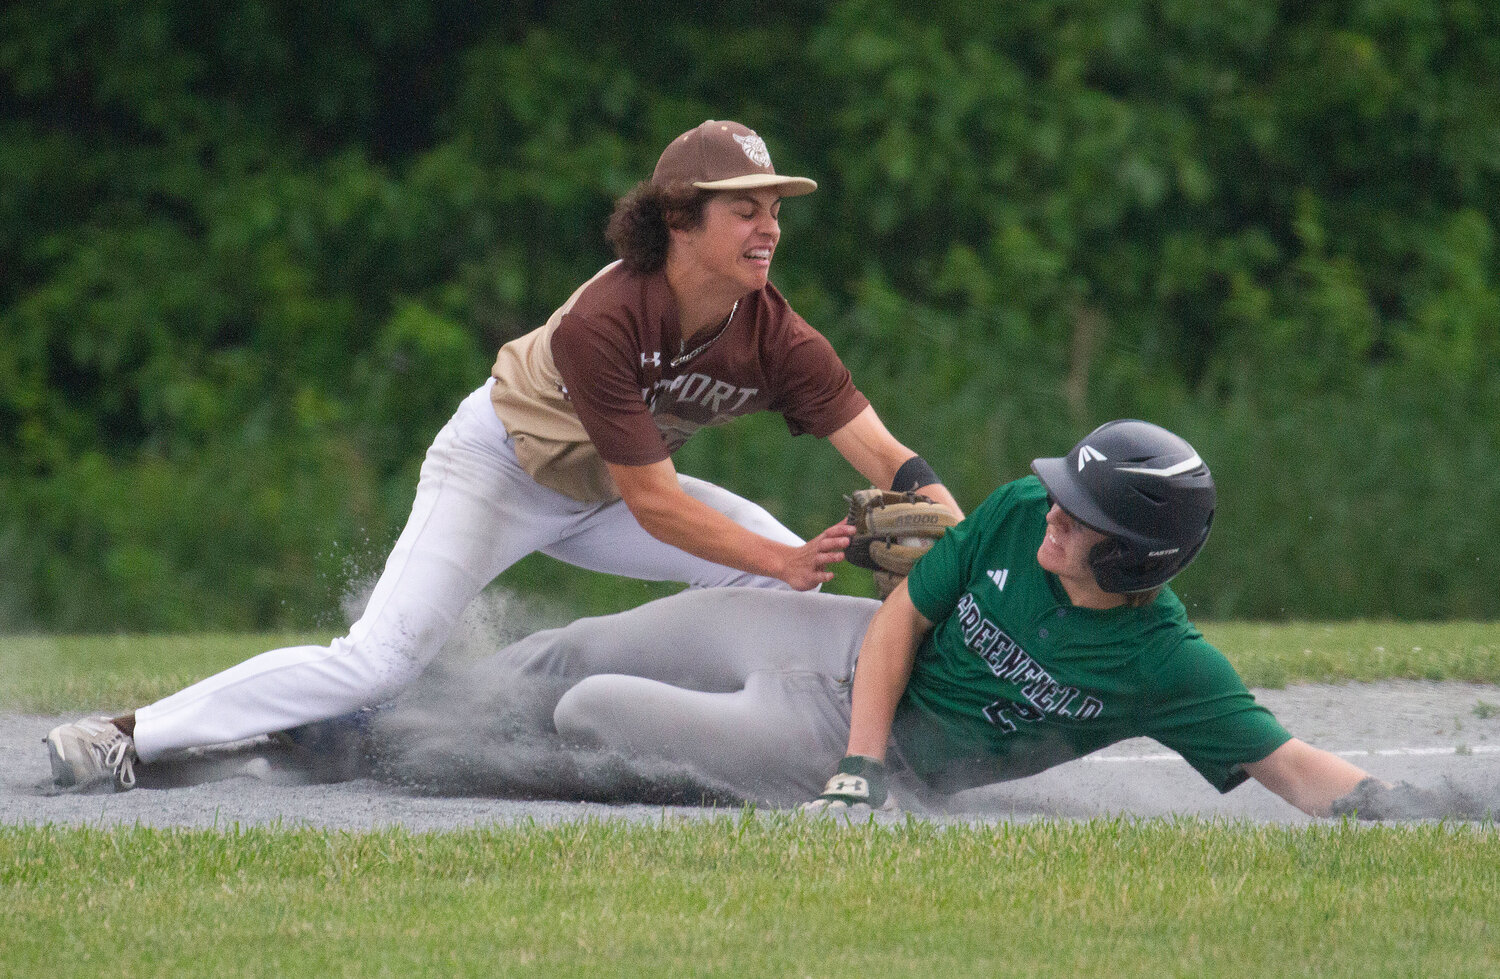 Third baseman Vaughn Costa tags out Greenfield baserunner Mike Pierce for a 5-3-5 double play in the fourth inning.